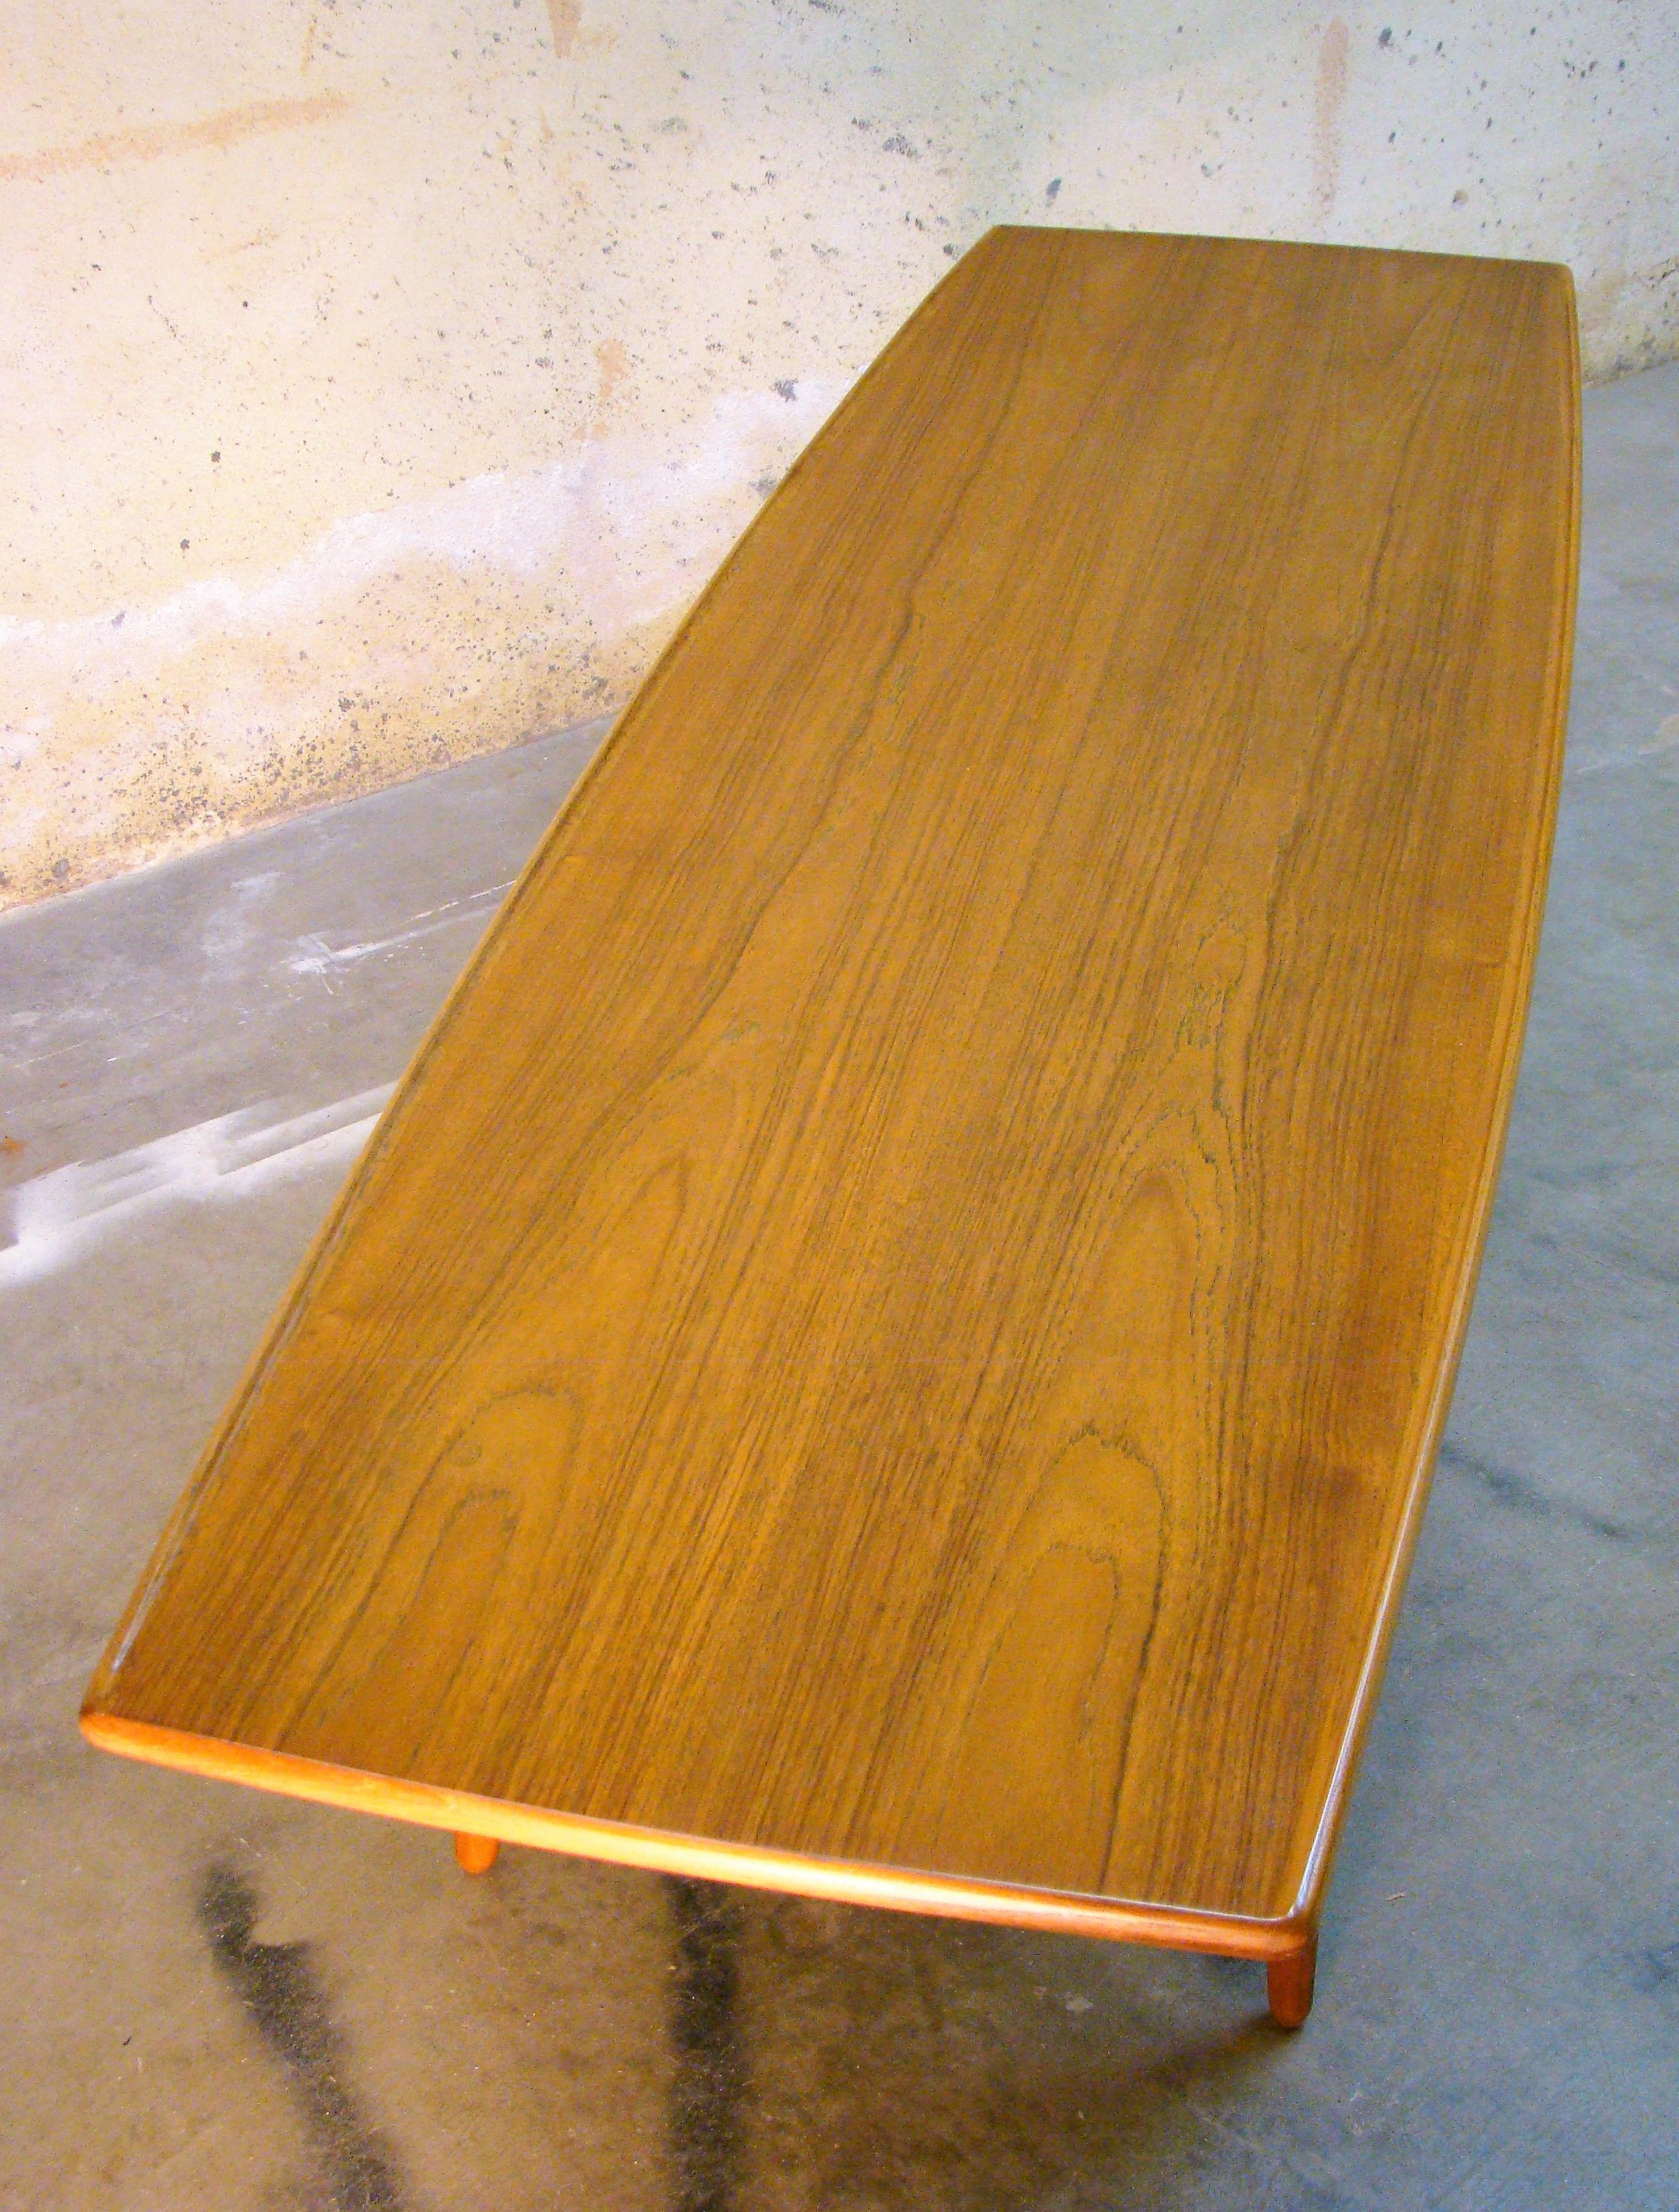 Hand-Crafted Danish Modern Long Teak Surfboard Coffee Table stamped KT 20, Denmark